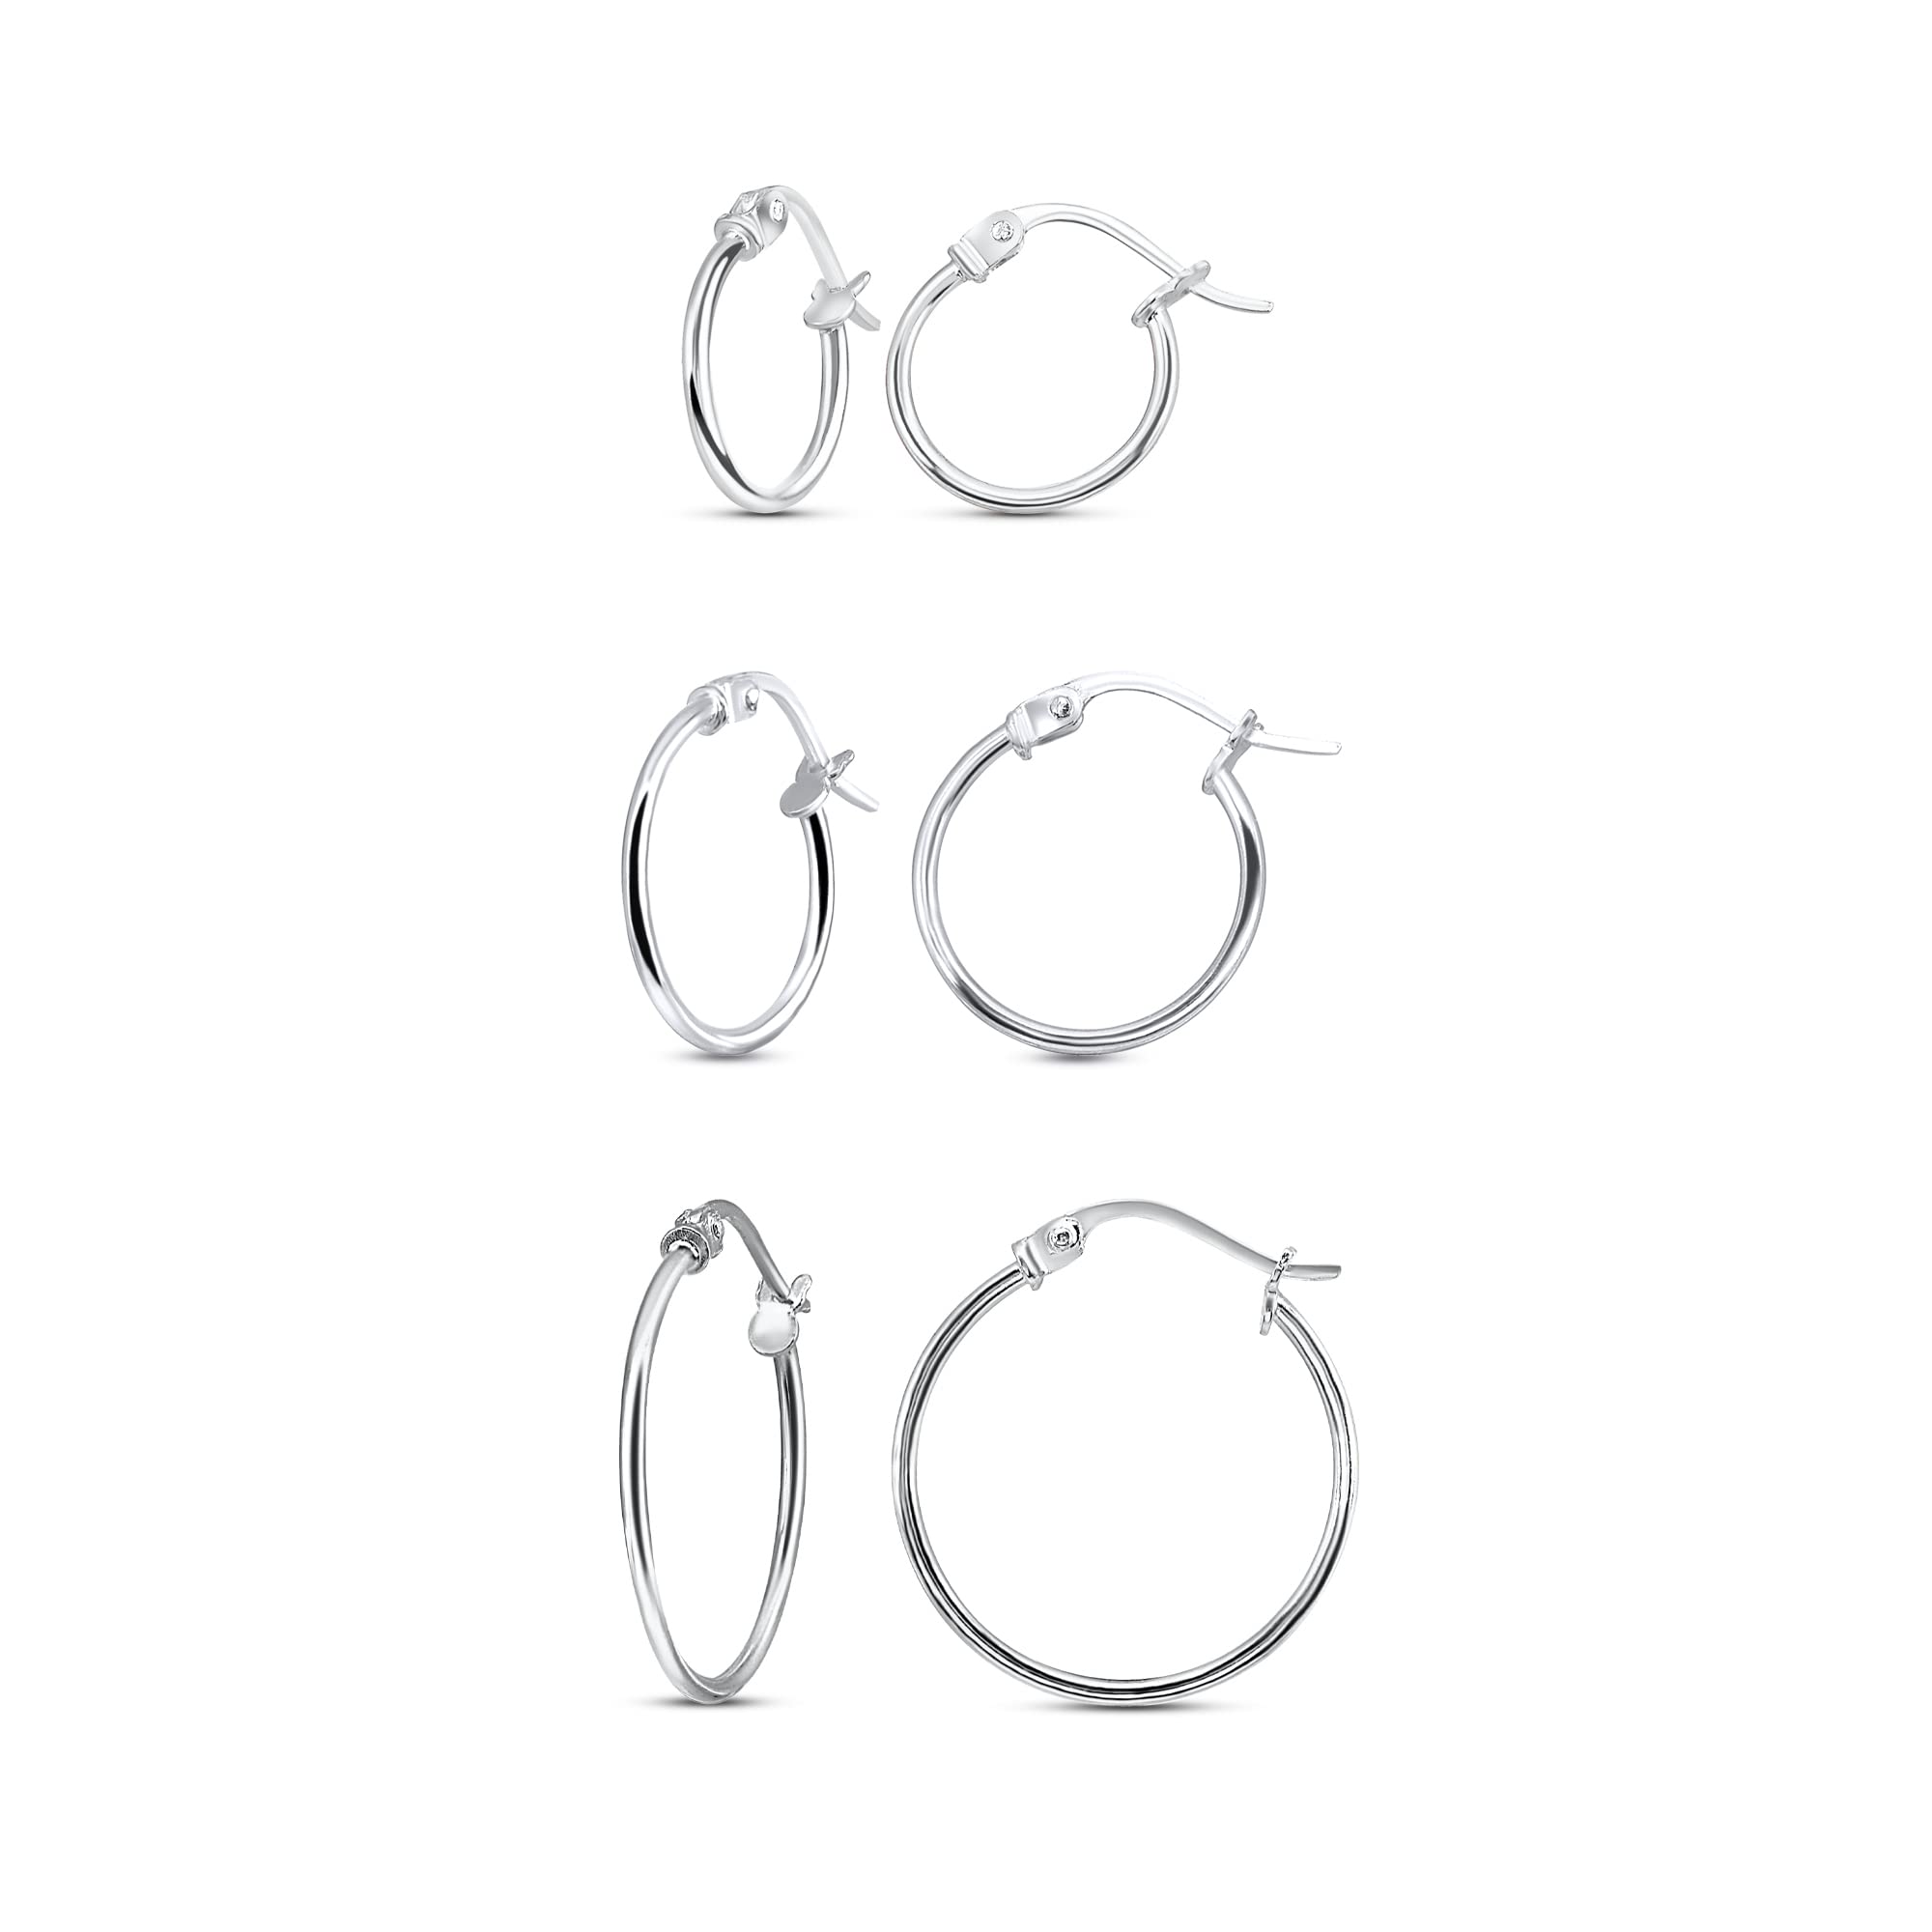 Sterling Silver Hoop Earrings for Women - Gold Hoop Earrings - Hoop Earrings Set - Thin Light Polished Round Post Click-top Hoops Earring for Women Girls Men, 12-20mm Diameter, 1-3 Pairs Jewelry Sets